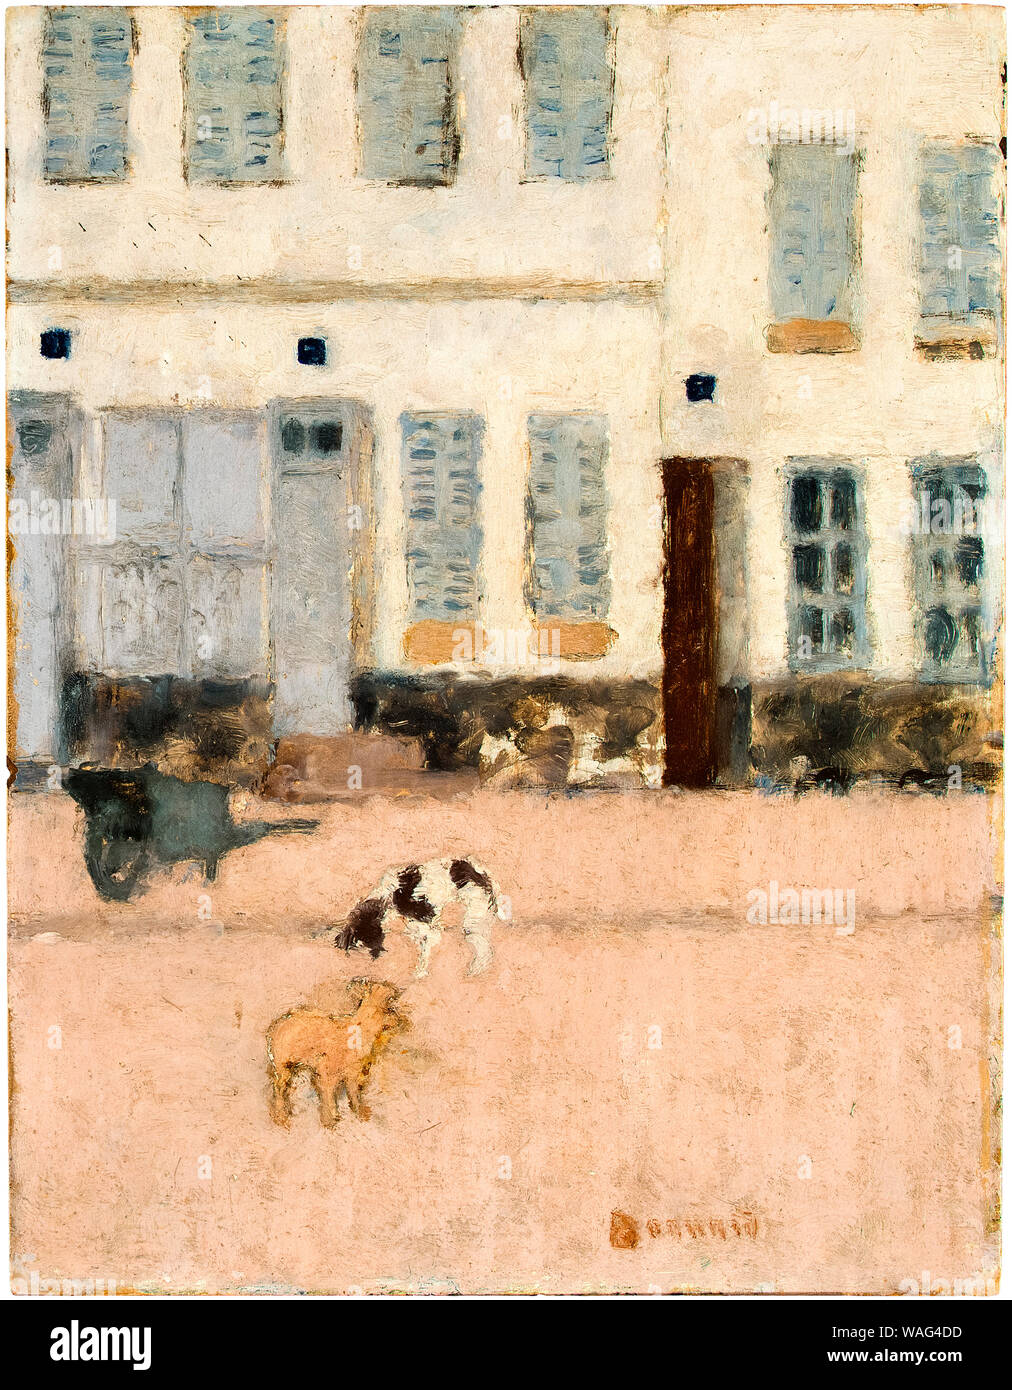 Pierre Bonnard, painting, Two Dogs in a Deserted Street, circa 1894 Stock Photo